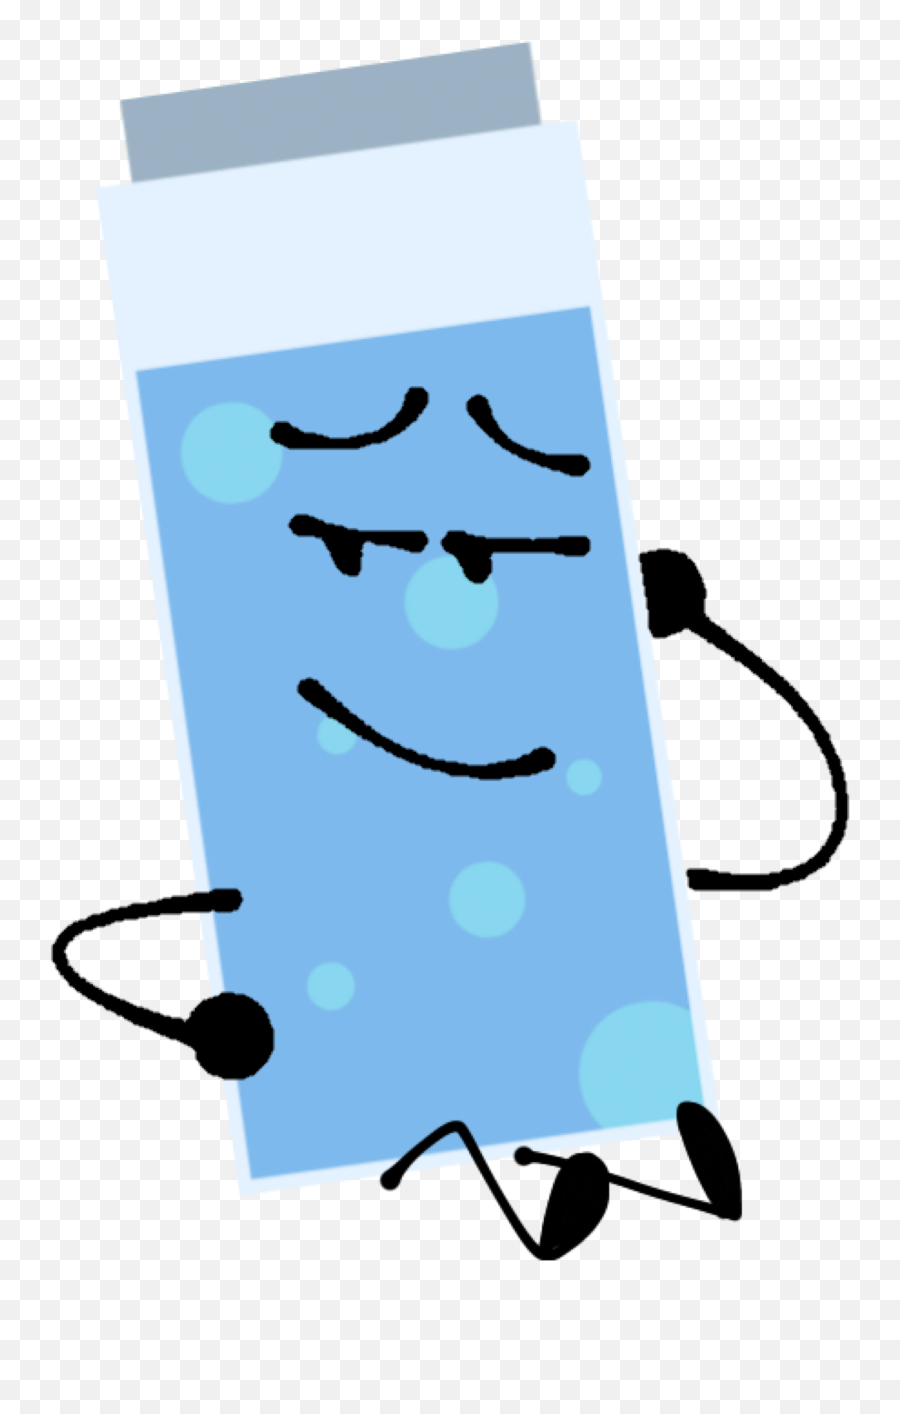 The Daily Object Show Wiki Object Show Water Bottle Emoji, Water Emoticon transparent emoji